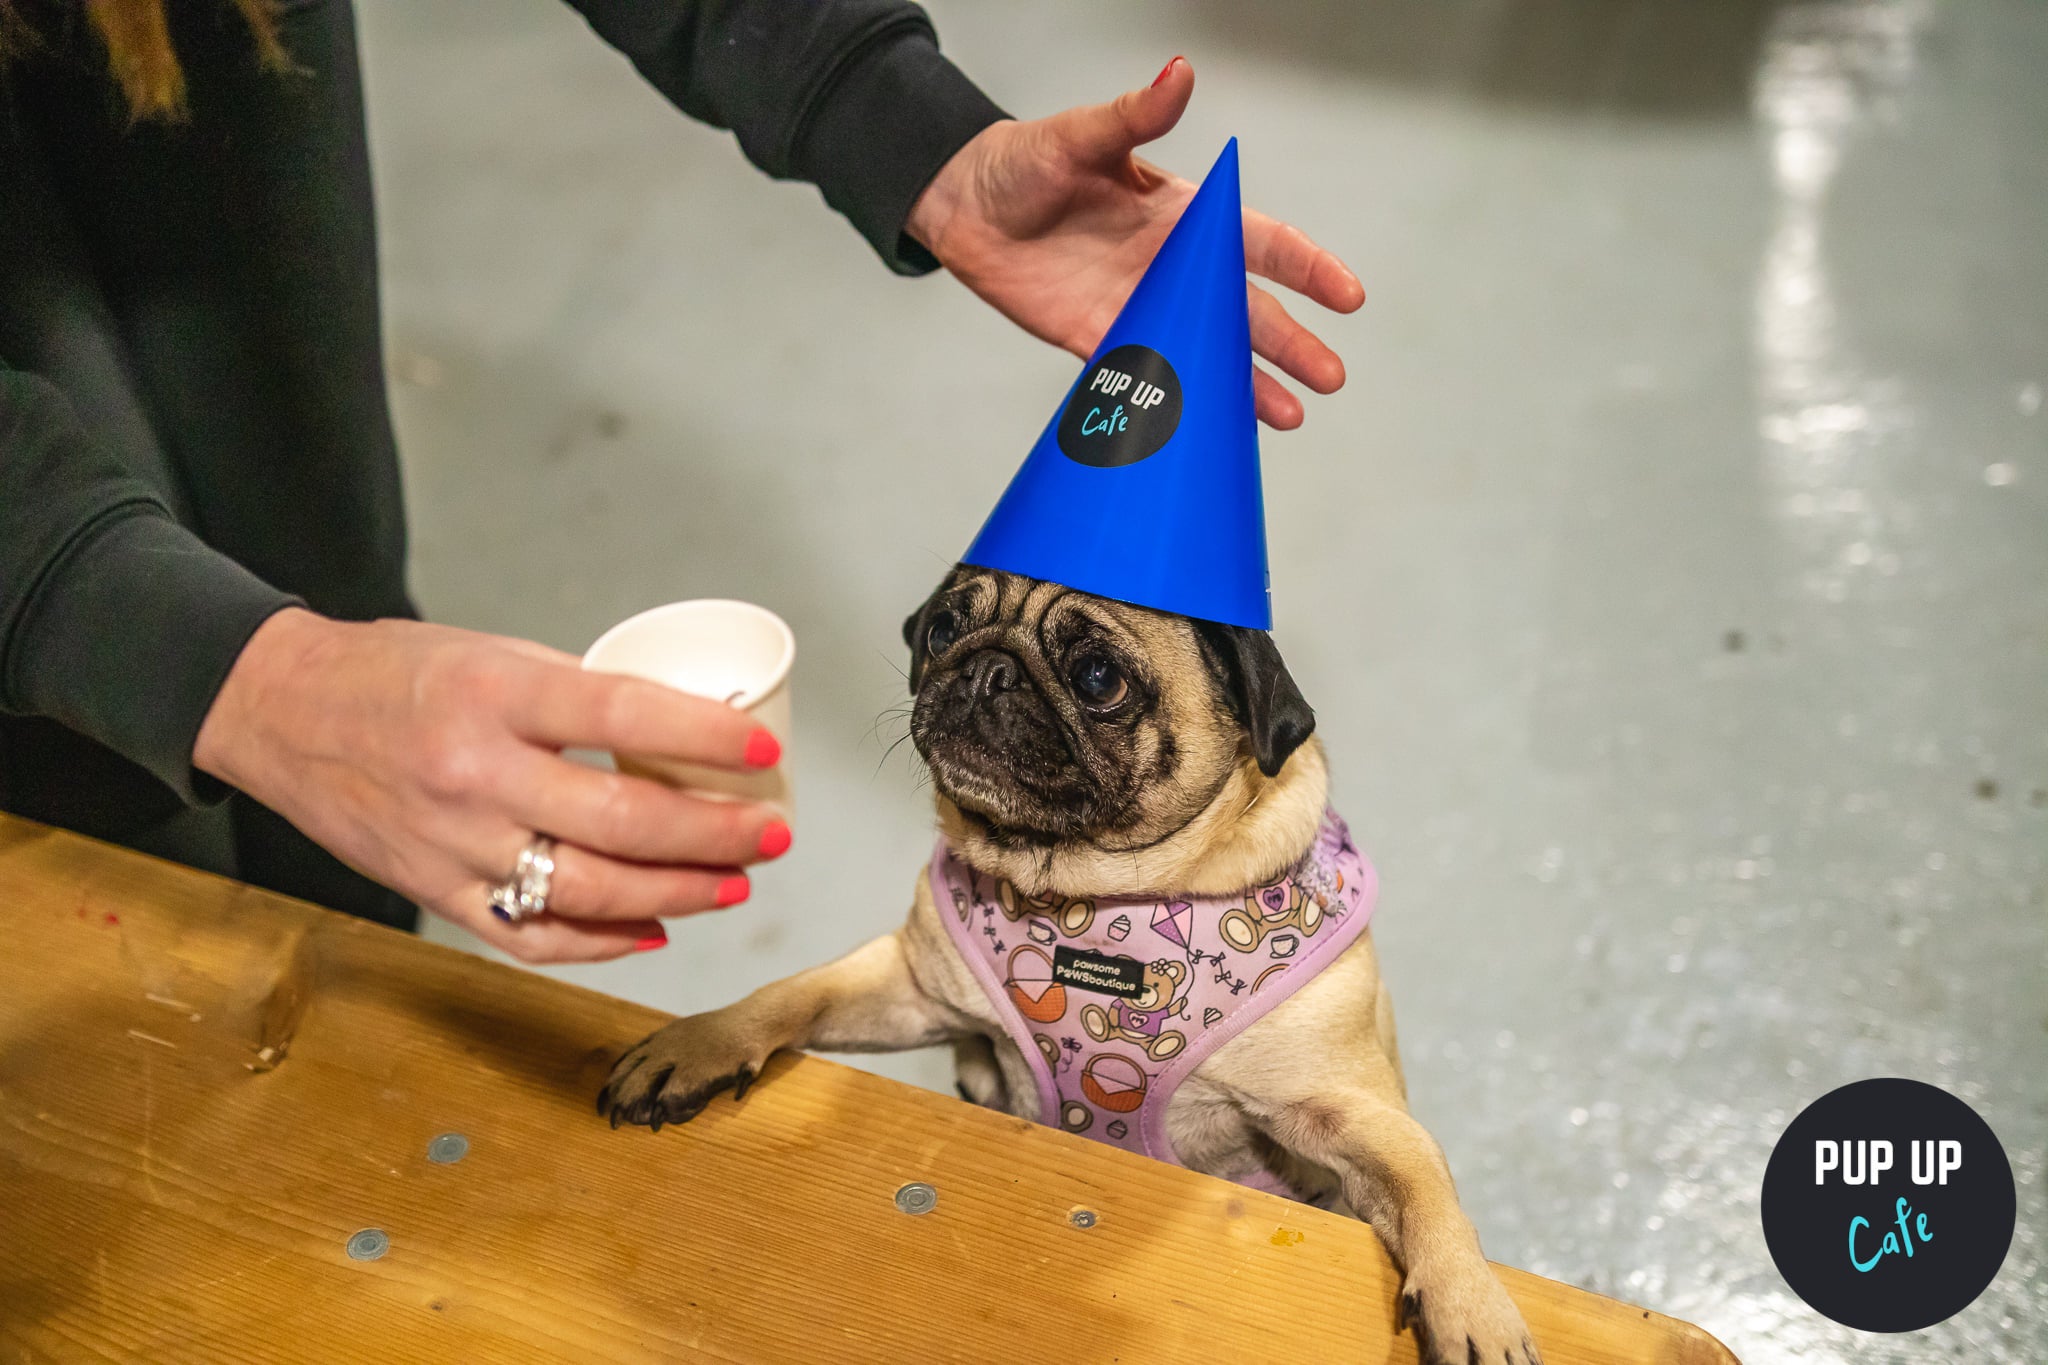 A pug wearing a Pup Up Cafe hat enjoys a treat